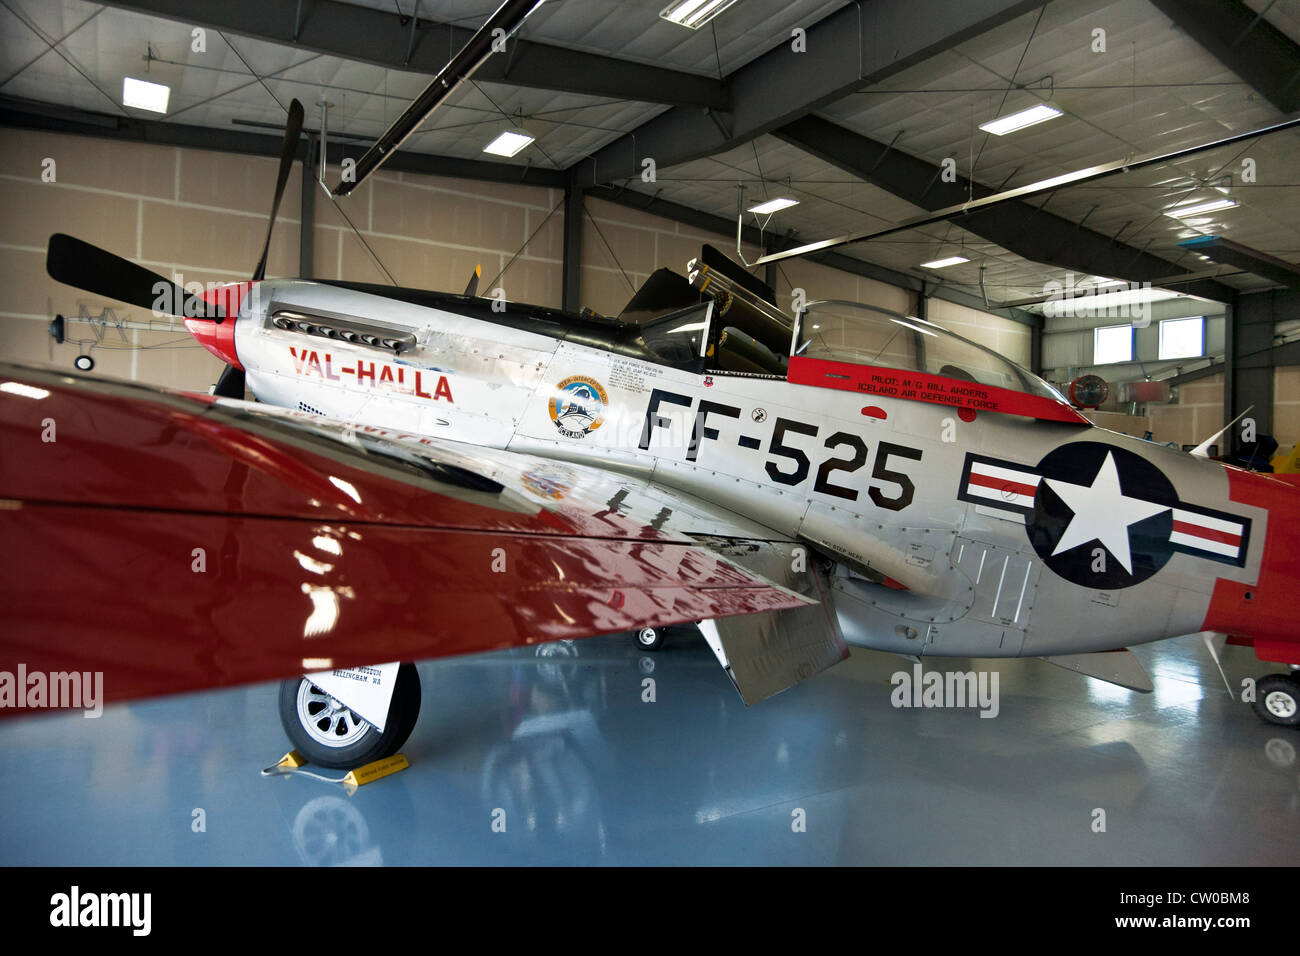 beautifully restored P-51 Mustang Val-Halla used during WWII displayed Heritage Flight Museum Bellingham International Airport Stock Photo